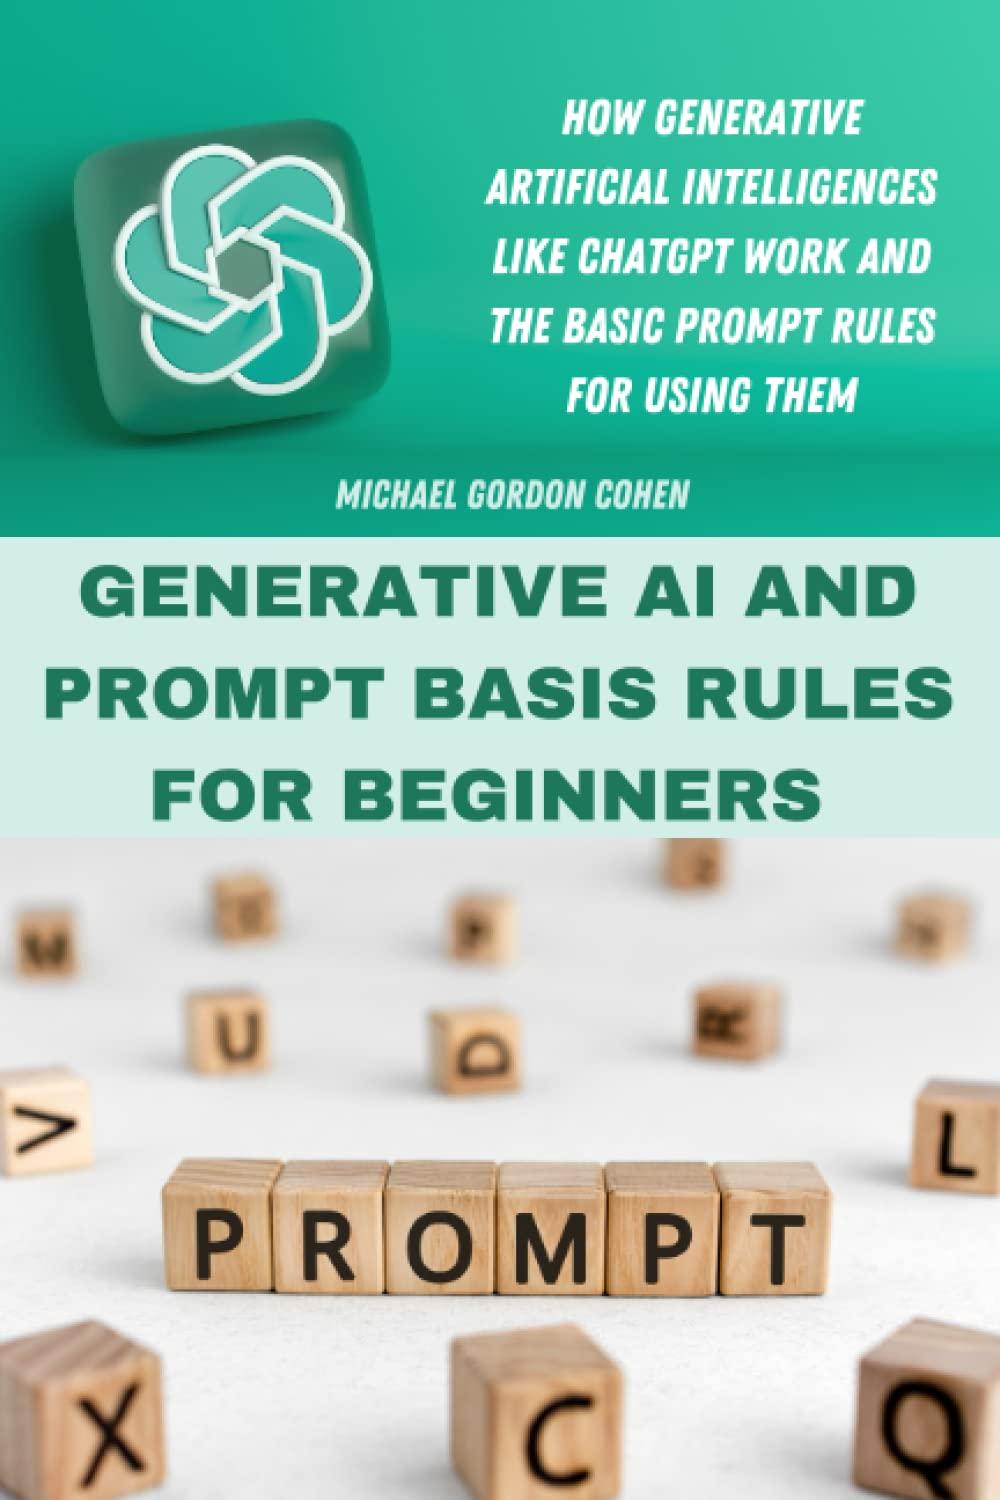 generative ai and prompt basic rules for beginners how generative artificial intelligences like chatgpt work